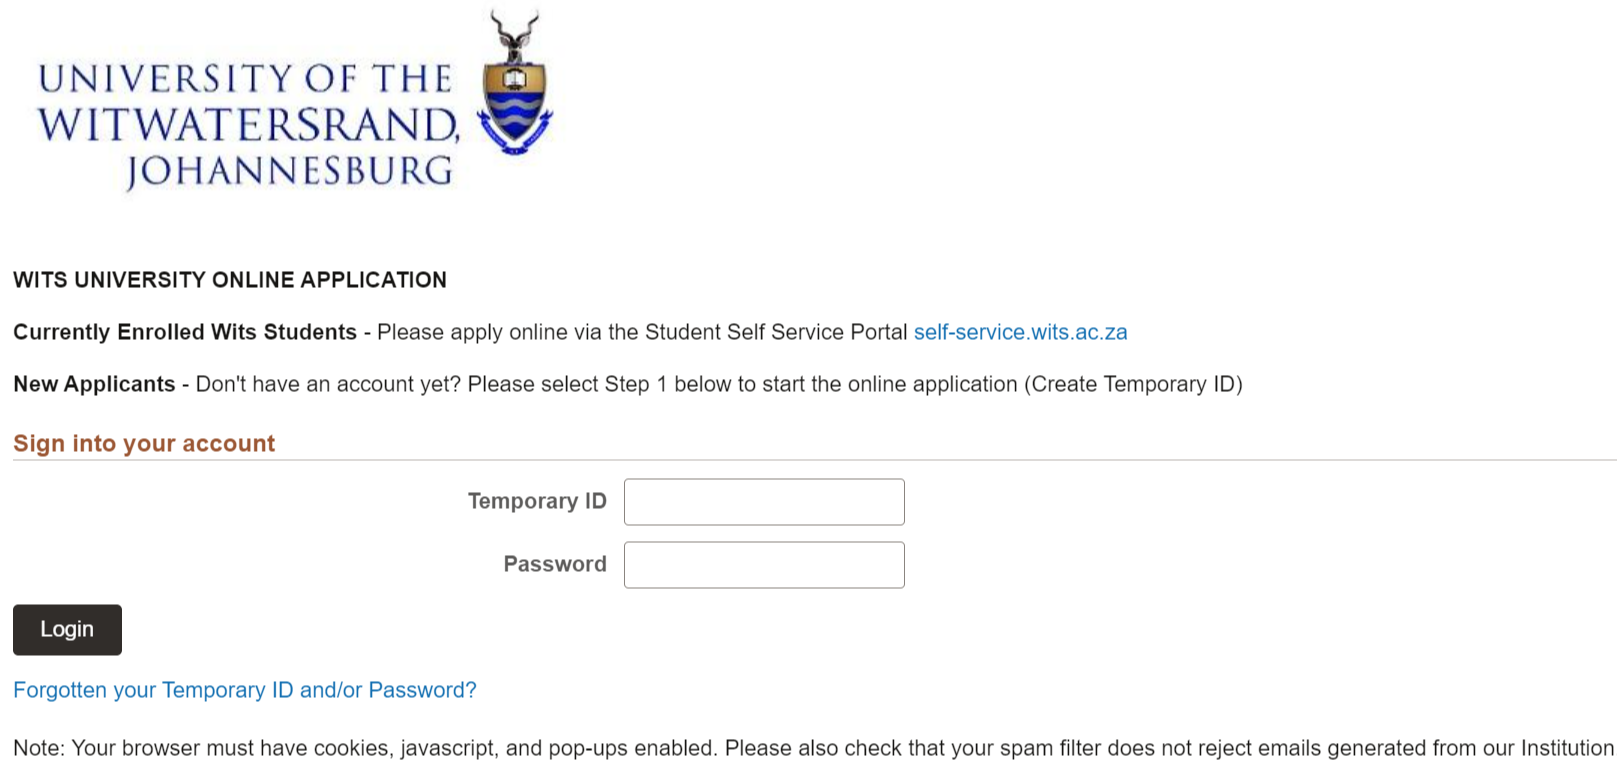 University of Witwatersrand (Wits) Online Registration